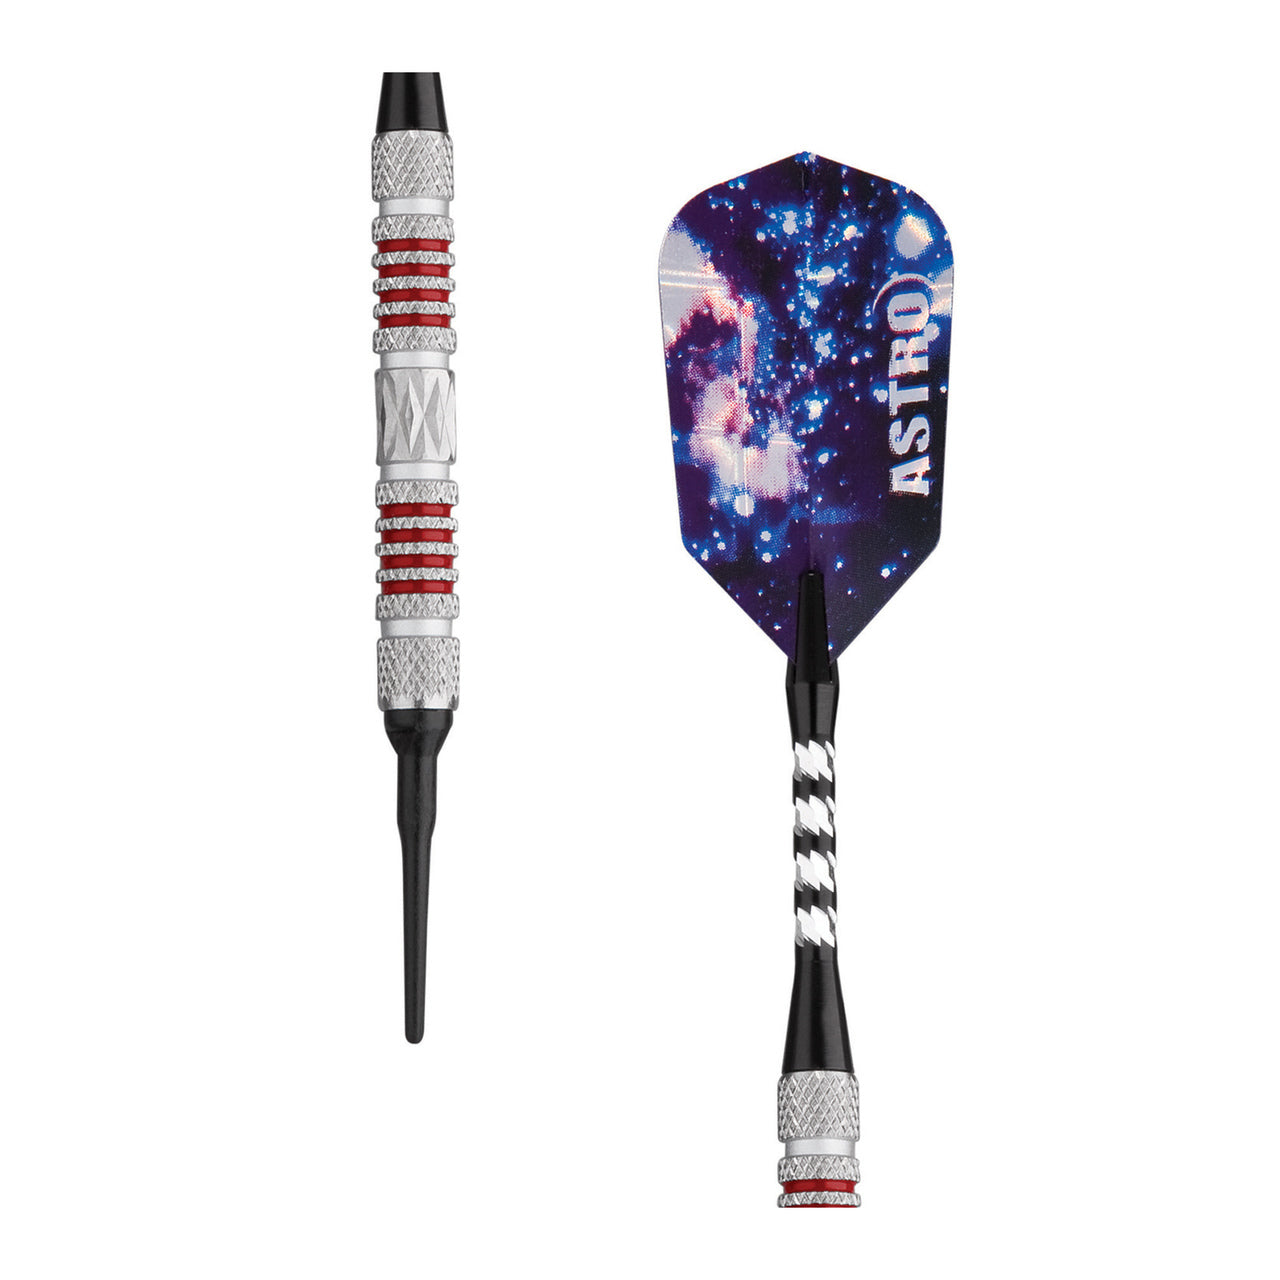 Viper Astro Tungsten Soft Tip Darts Red Rings 18 Grams